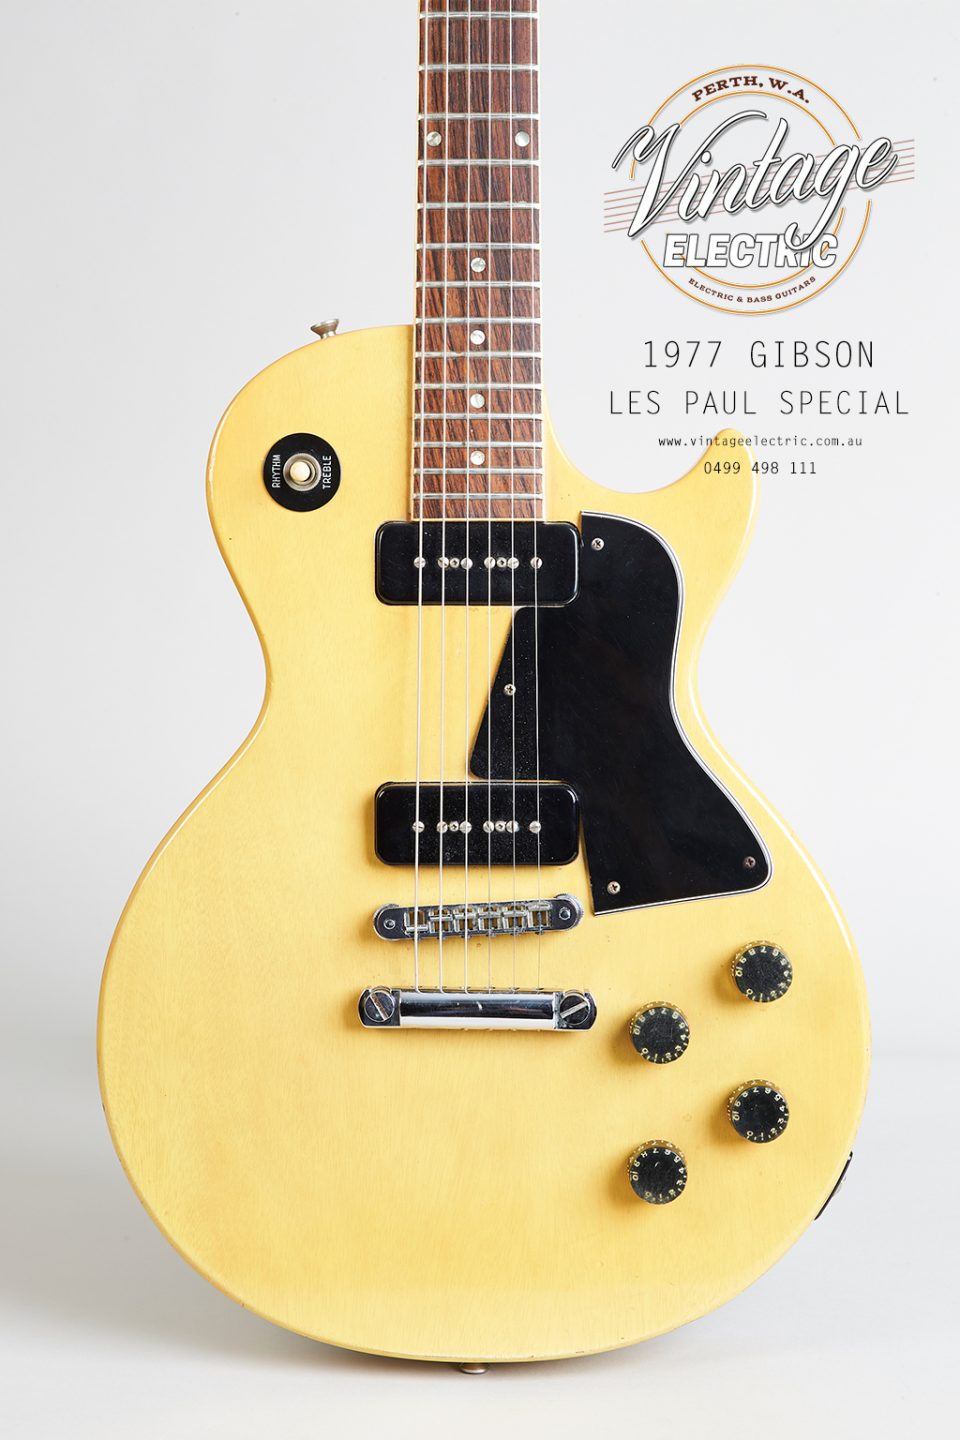 1977 Gibson Les Paul Special Body